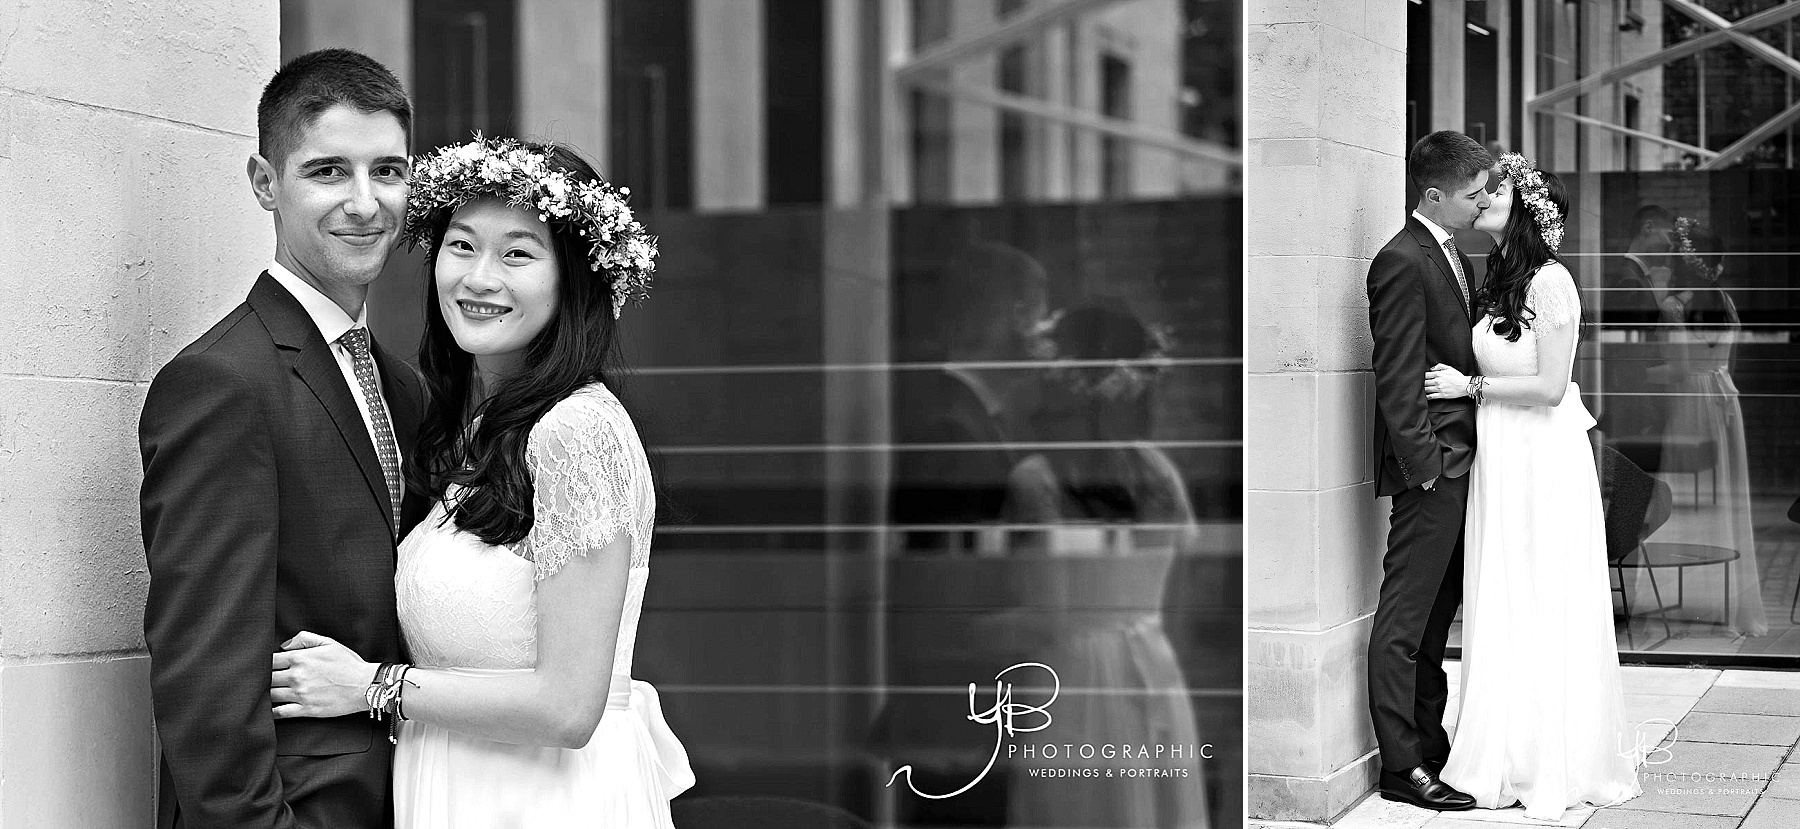 Bride and groom portraits in black and white after a Soho Room wedding ceremony.